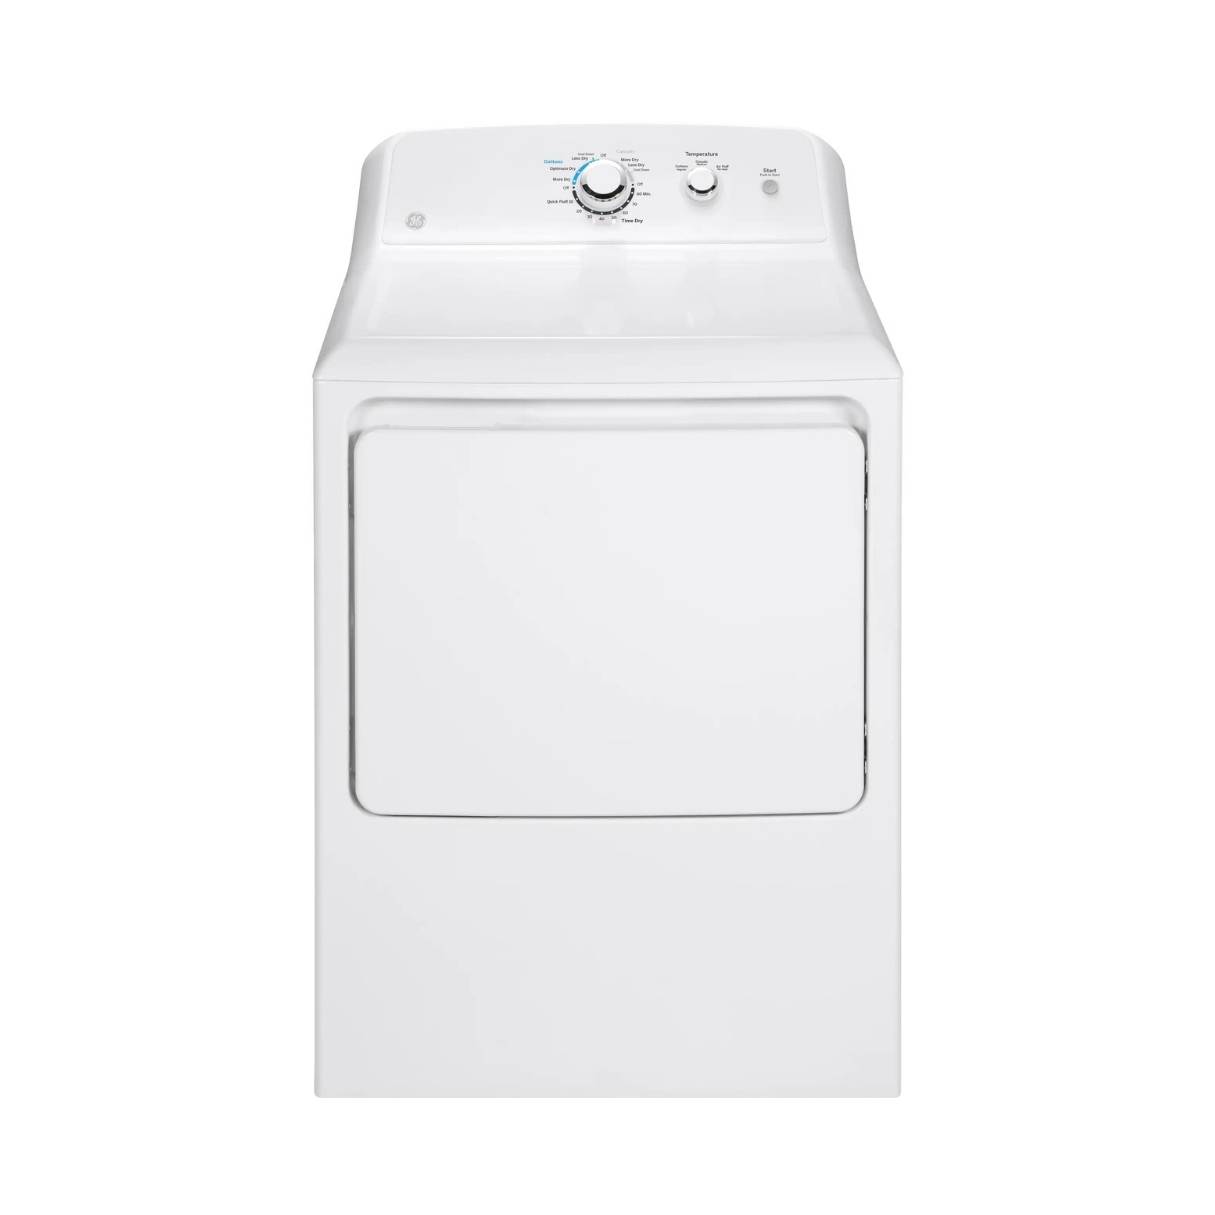 How To Fix The Error Code E64 For GE Dryer